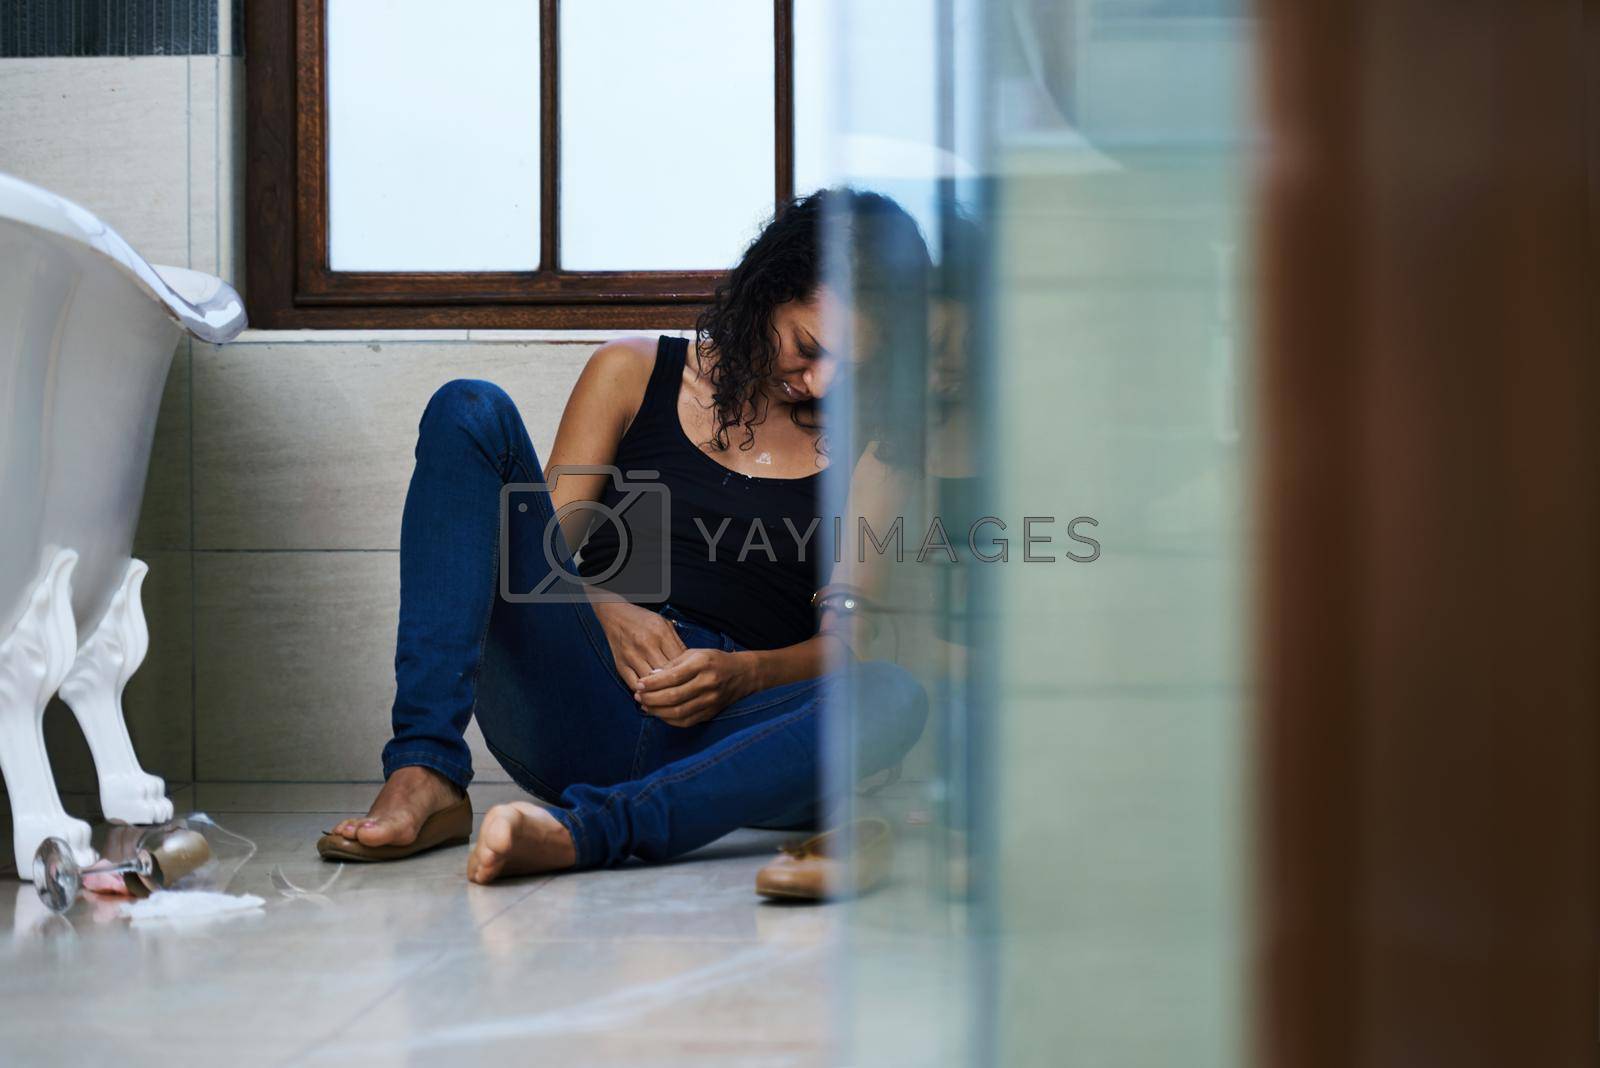 Royalty free image of Sick and tired. a drug addict passed out in the bathroom. by YuriArcurs